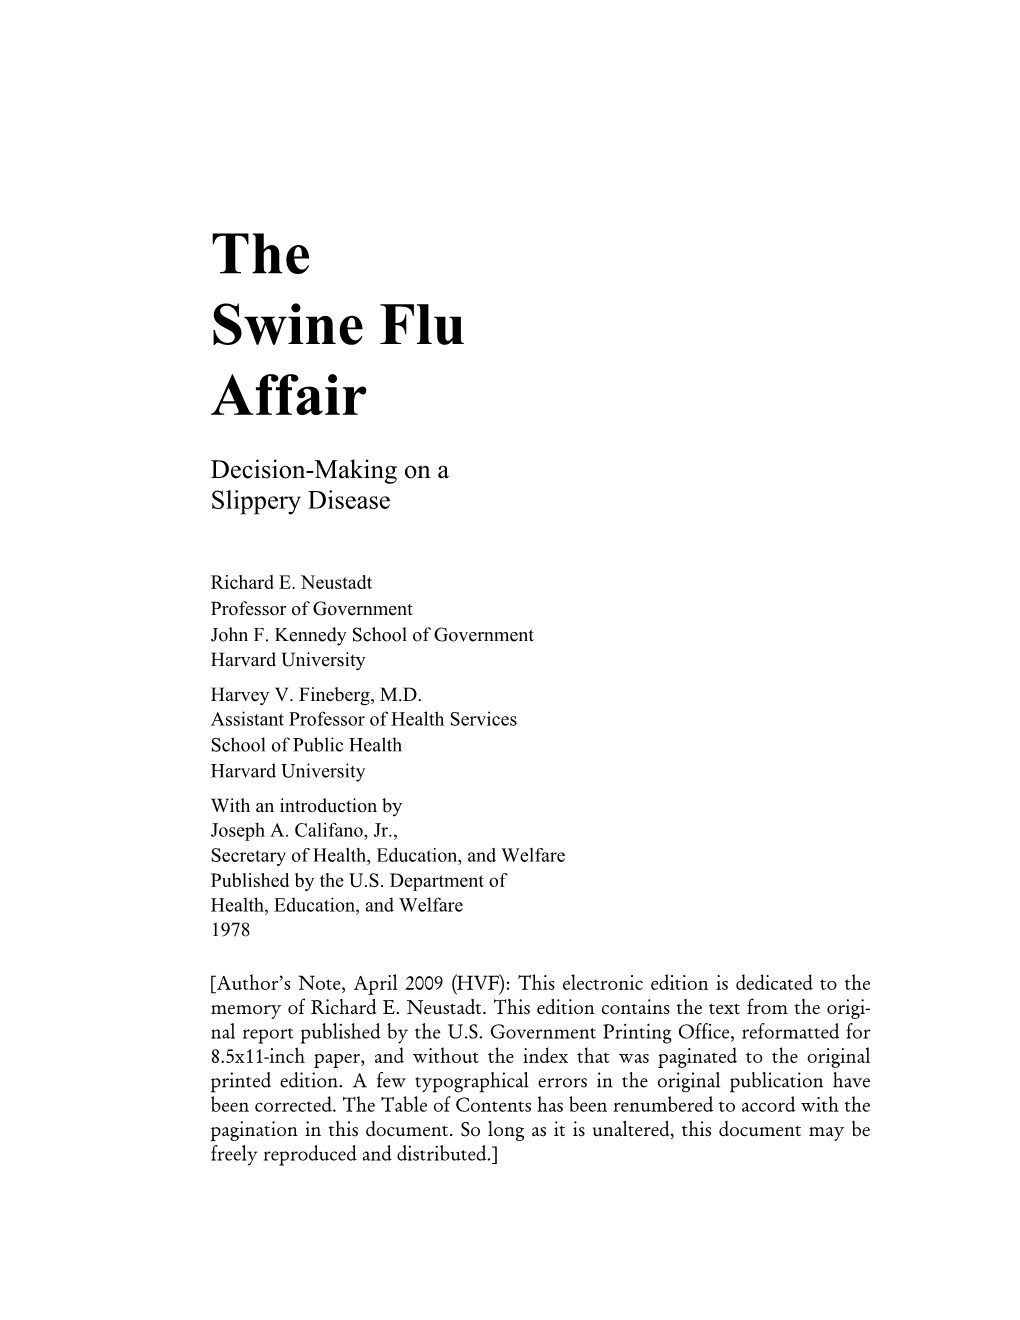 The Swine Flu Affair—In Search of Lessons for the Future, Not of Fault in the Past